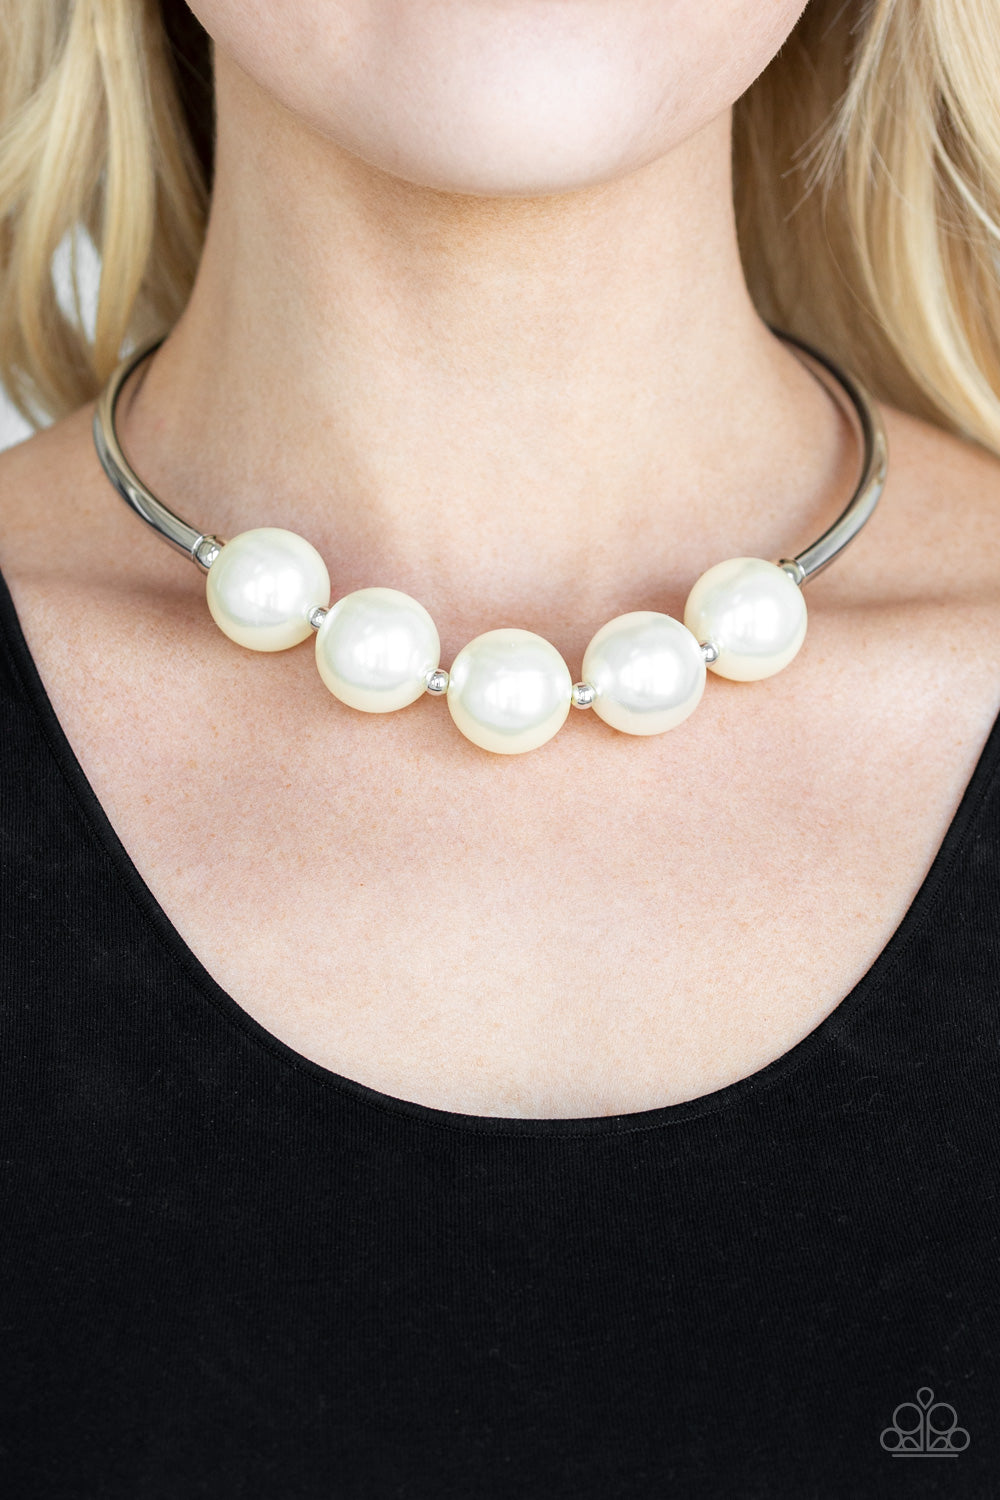 Paparazzi Welcome To Wall Street White Short Necklace